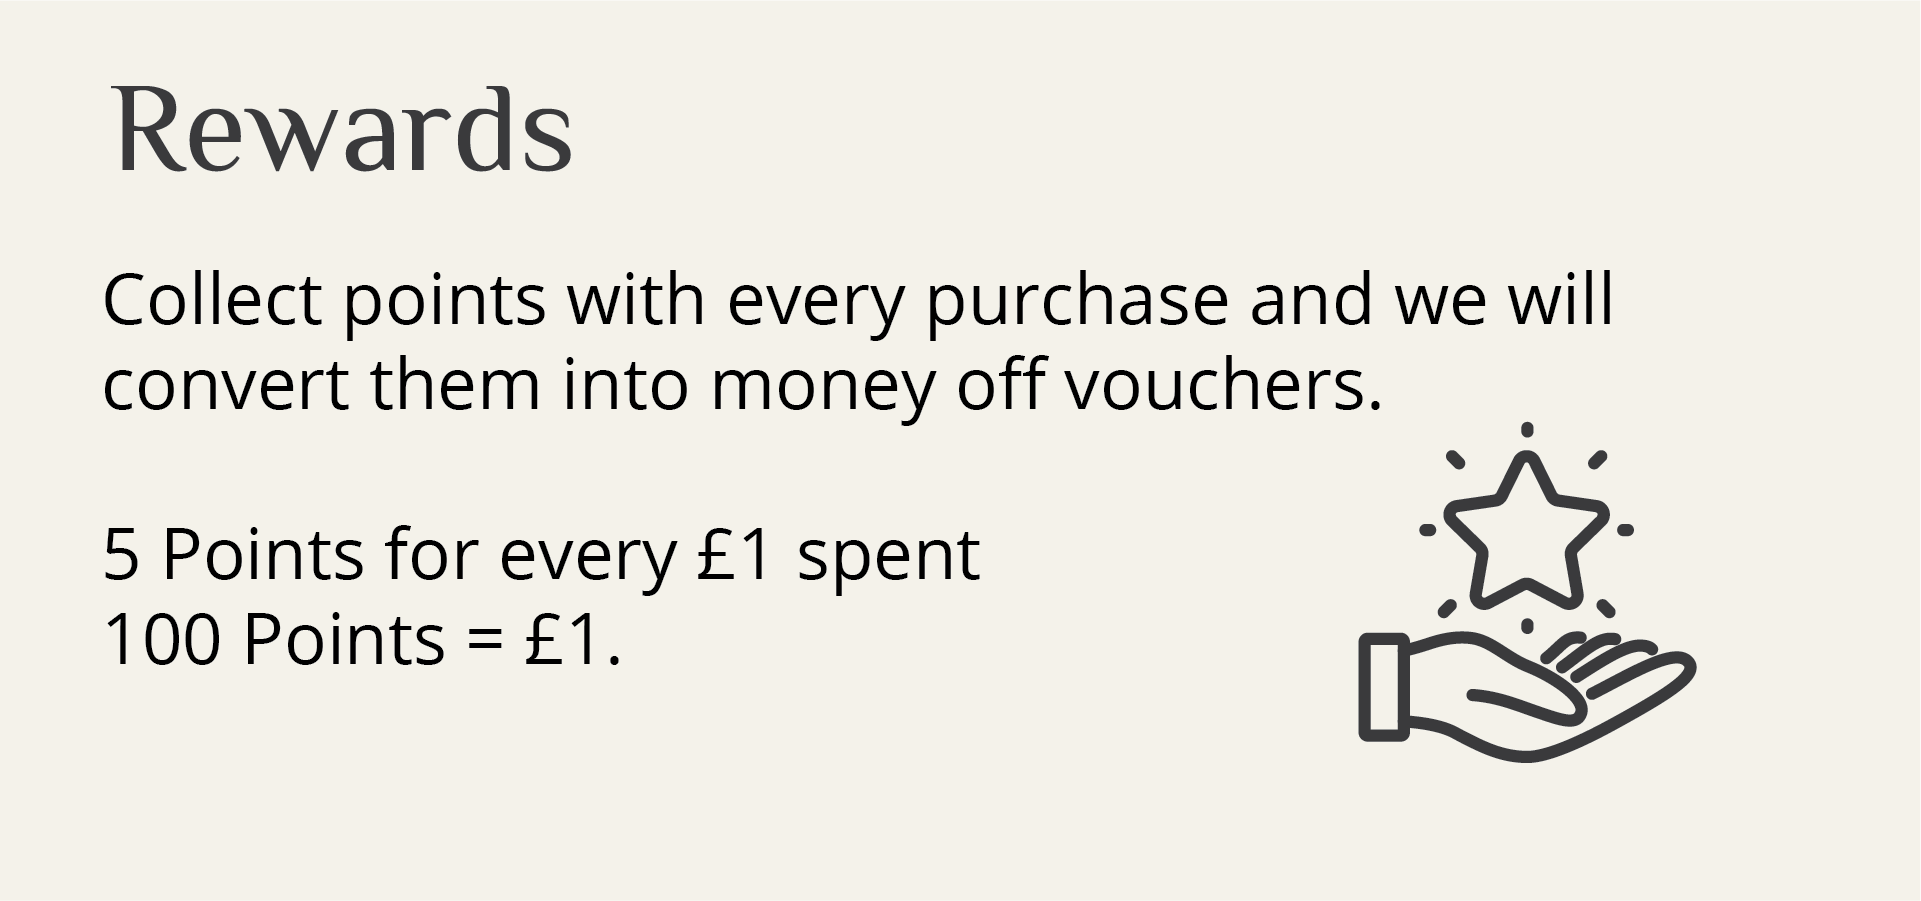 Rewards, collect points with every purchase and we will conver them into money off vouchers.